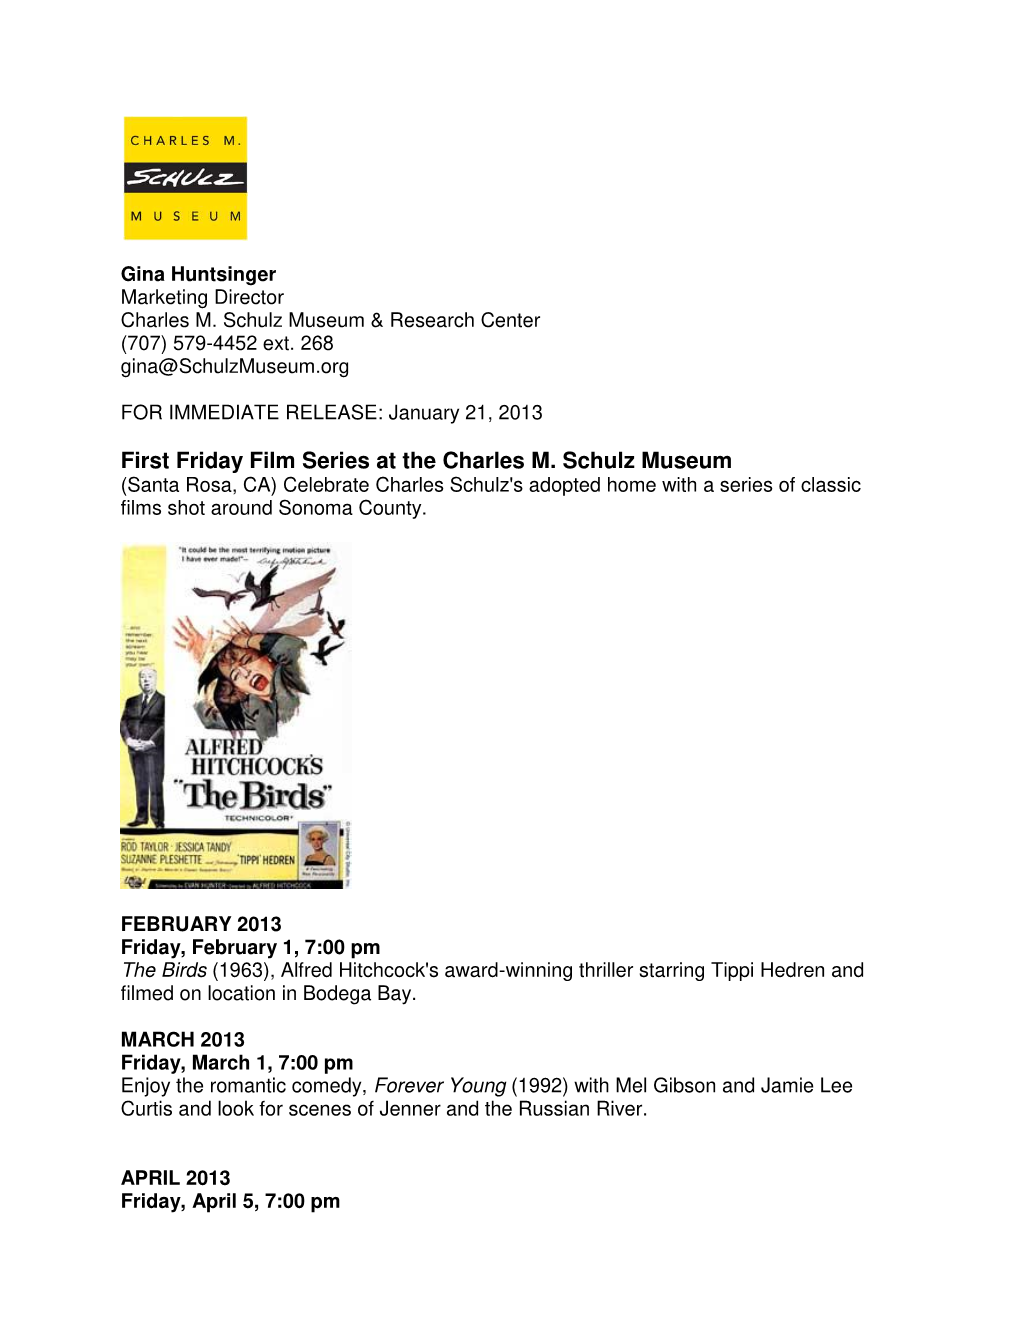 First Friday Film Series at the Charles M. Schulz Museum